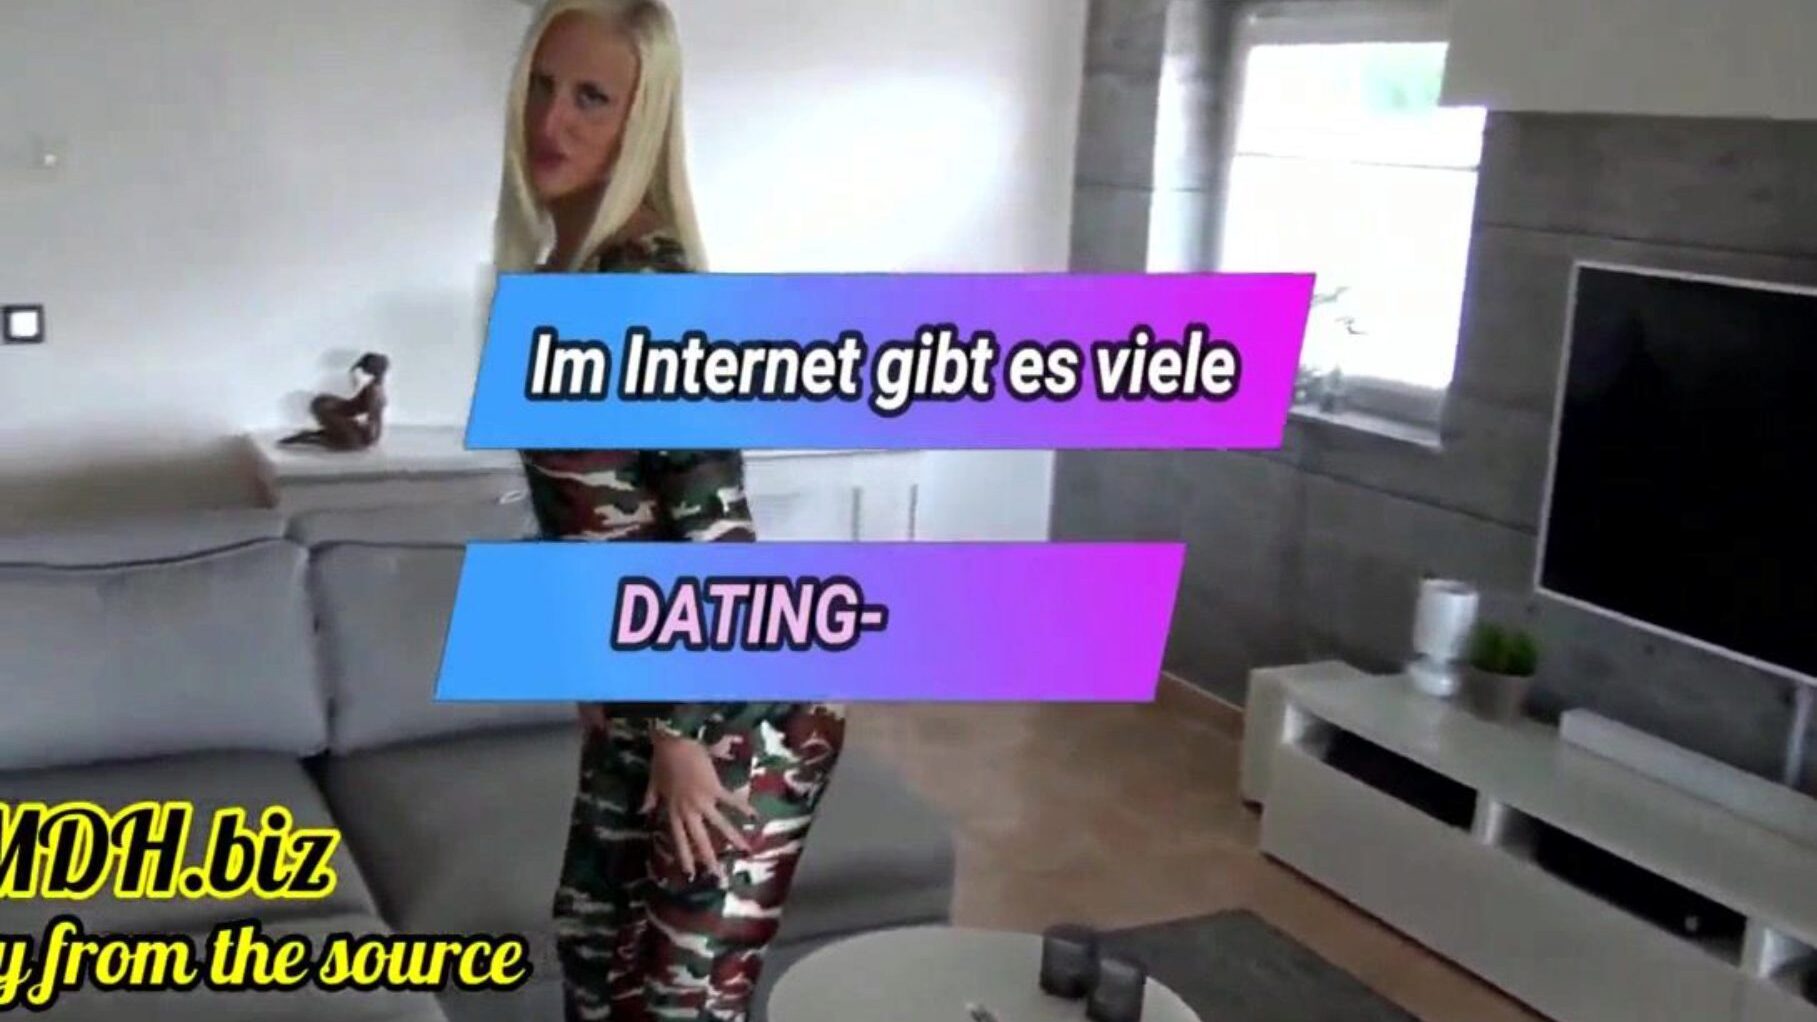 Grob Arsch Deutsche mother I'd like to fuck Gefickt Hart - Riesiger Cumshot Watch Grob Arsch Deutsche mother I'd like to fuck Gefickt Hart - Riesiger Cumshot movie scene on xHamster - the ultimate database of free-for-all German Squirting HD porno tube movies